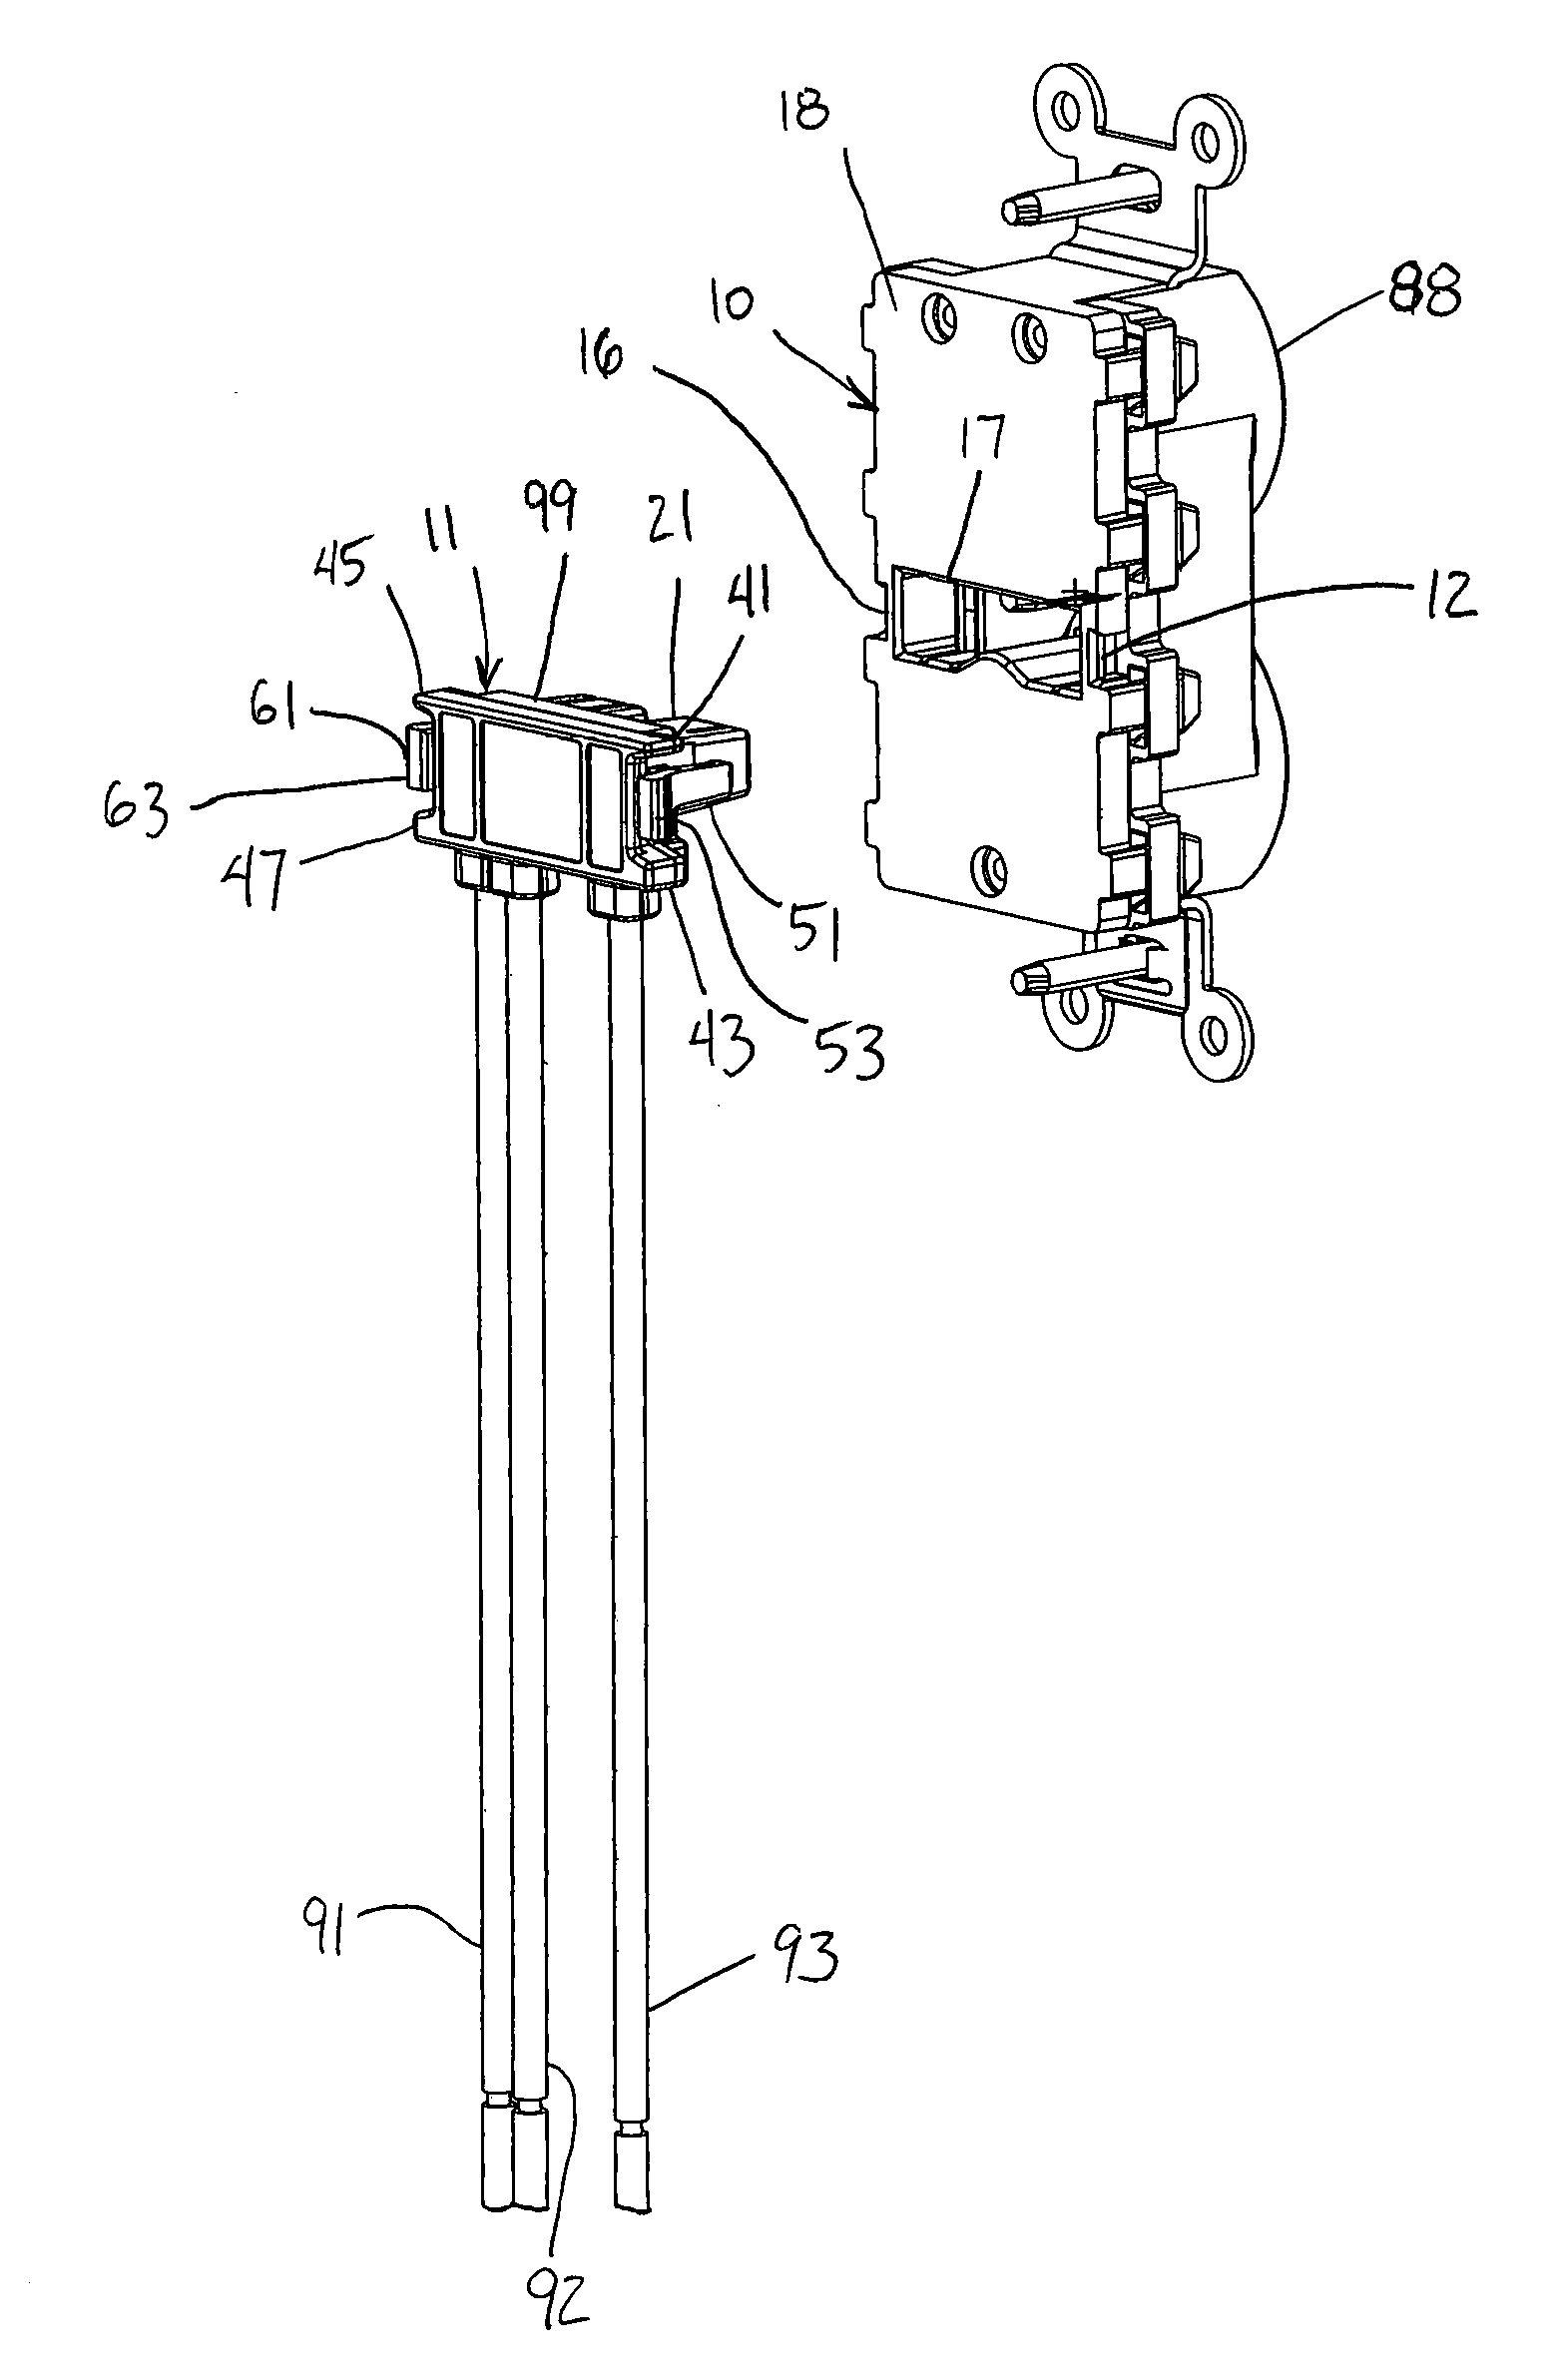 Dual latch electrical plug connector for electrical receptacle